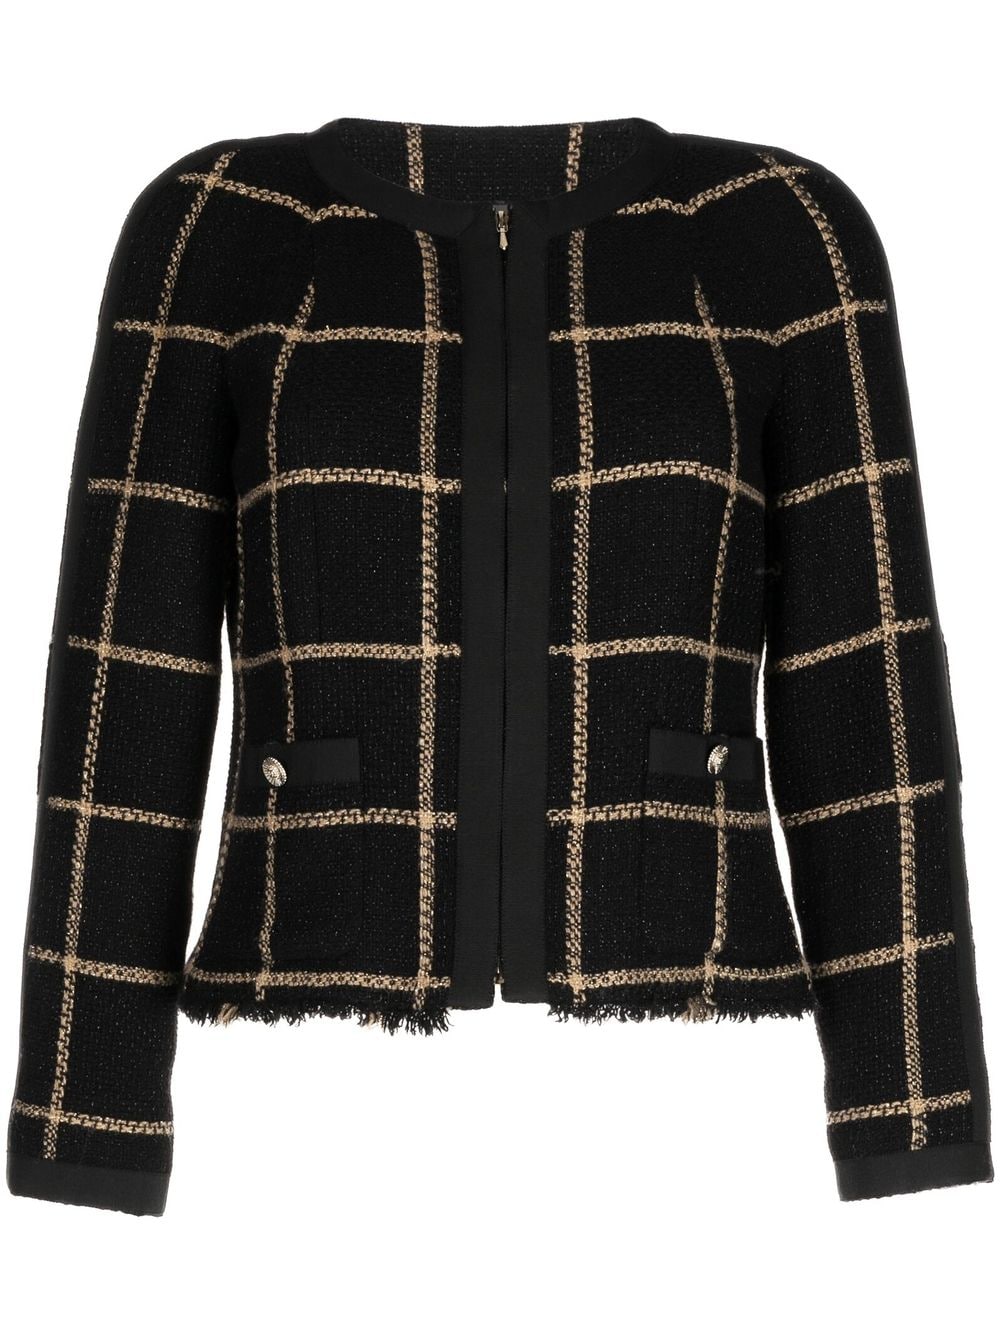 CHANEL Pre-Owned 2009 open-front Tweed Jacket - Farfetch